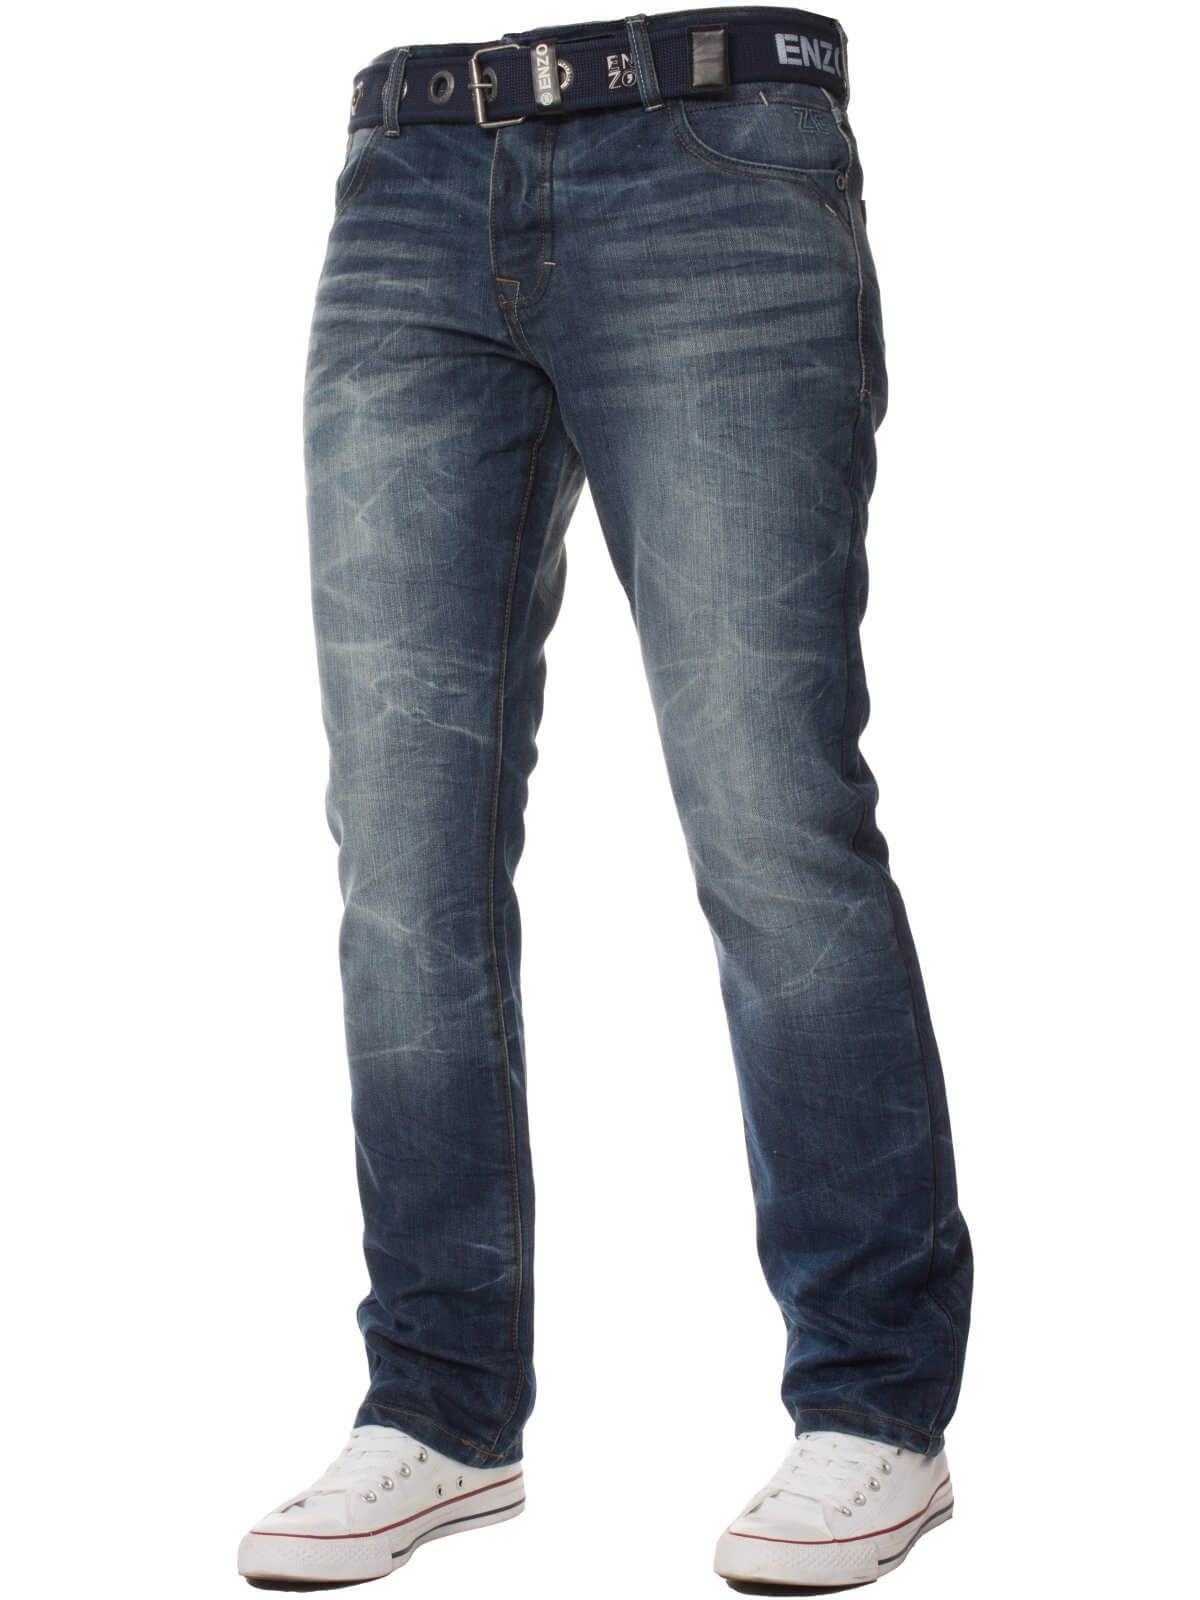 Crafted from hardwearing denim in a goes-with-everything dark stonewash blue, these mens jeans are a real wardrobe staple. These regular cut men's jeans sit low on the hip and are the same width all the way through the leg. Featuring zip fly, belt loops and embroidered Enzo jeans logo on the back pocket. Straight leg jeans are a classic style that suits almost everybody and with a range of three different leg lengths and waist sizes from 28 up to 60, theres a pair waiting for you.
Also available in Light stonewash.